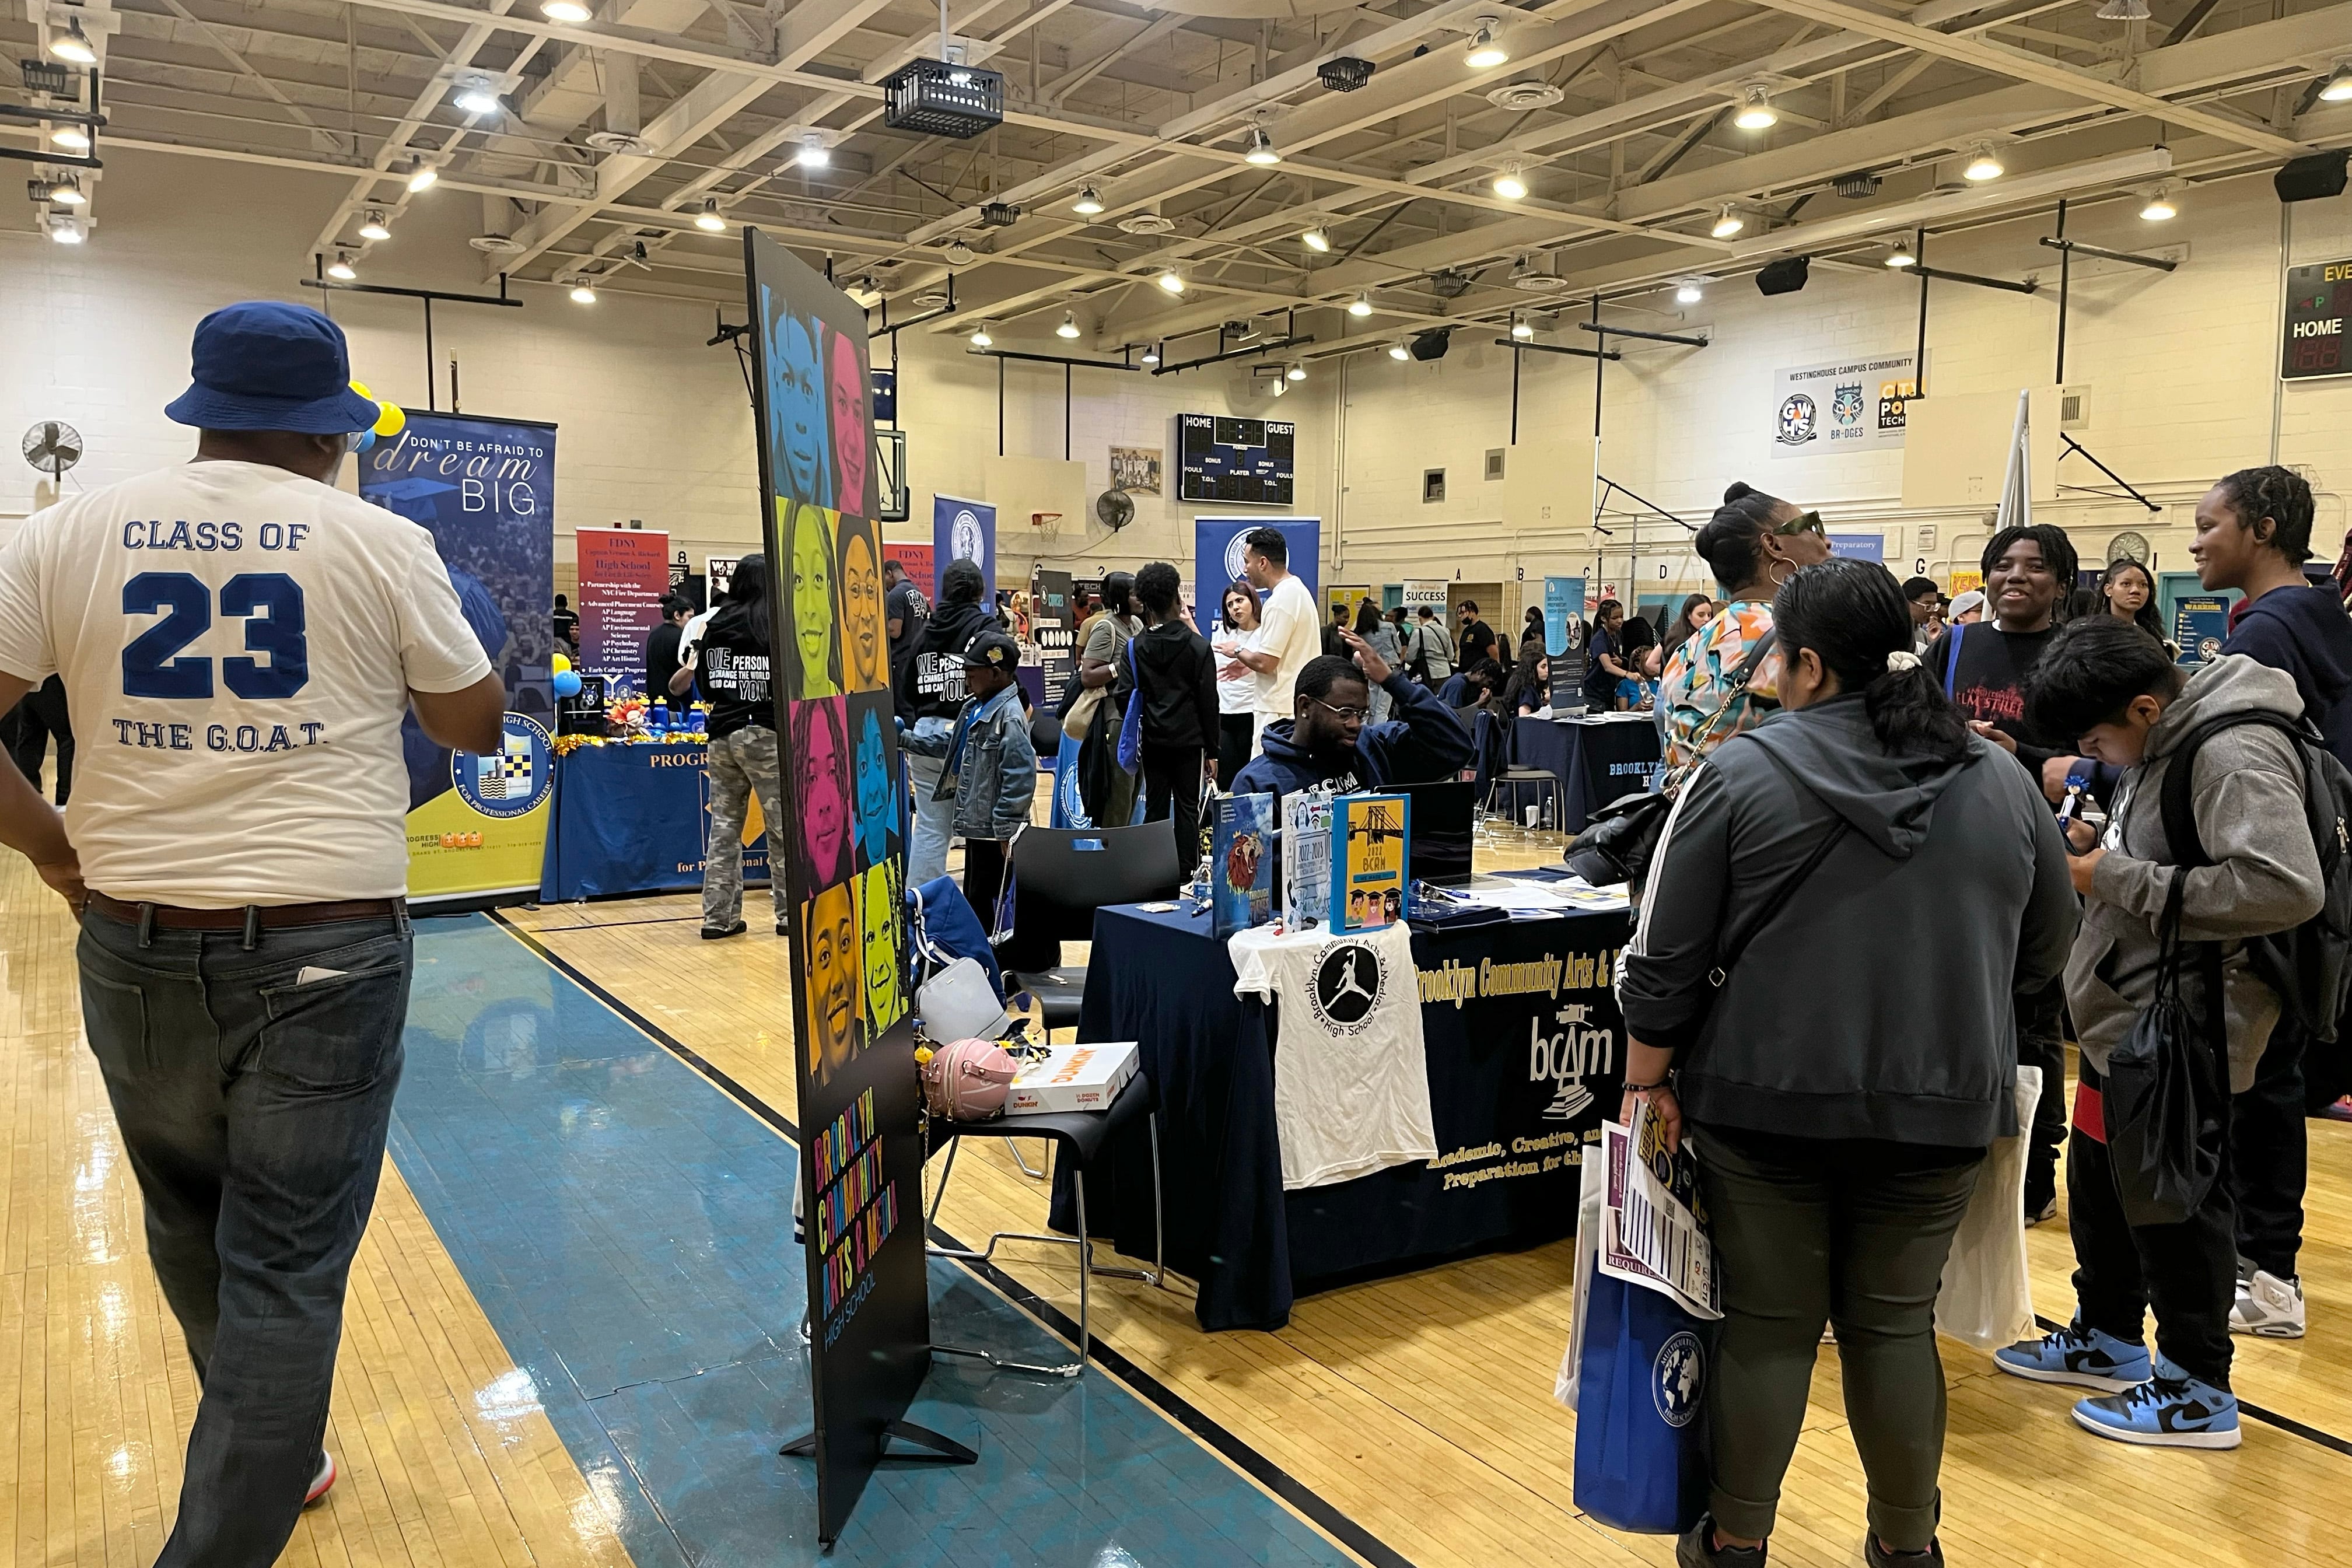 Families gather in George Westinghouse Career and Technical Education High School’s gymnasium, where local high schools have set up tables to chat with prospective students about their schools.